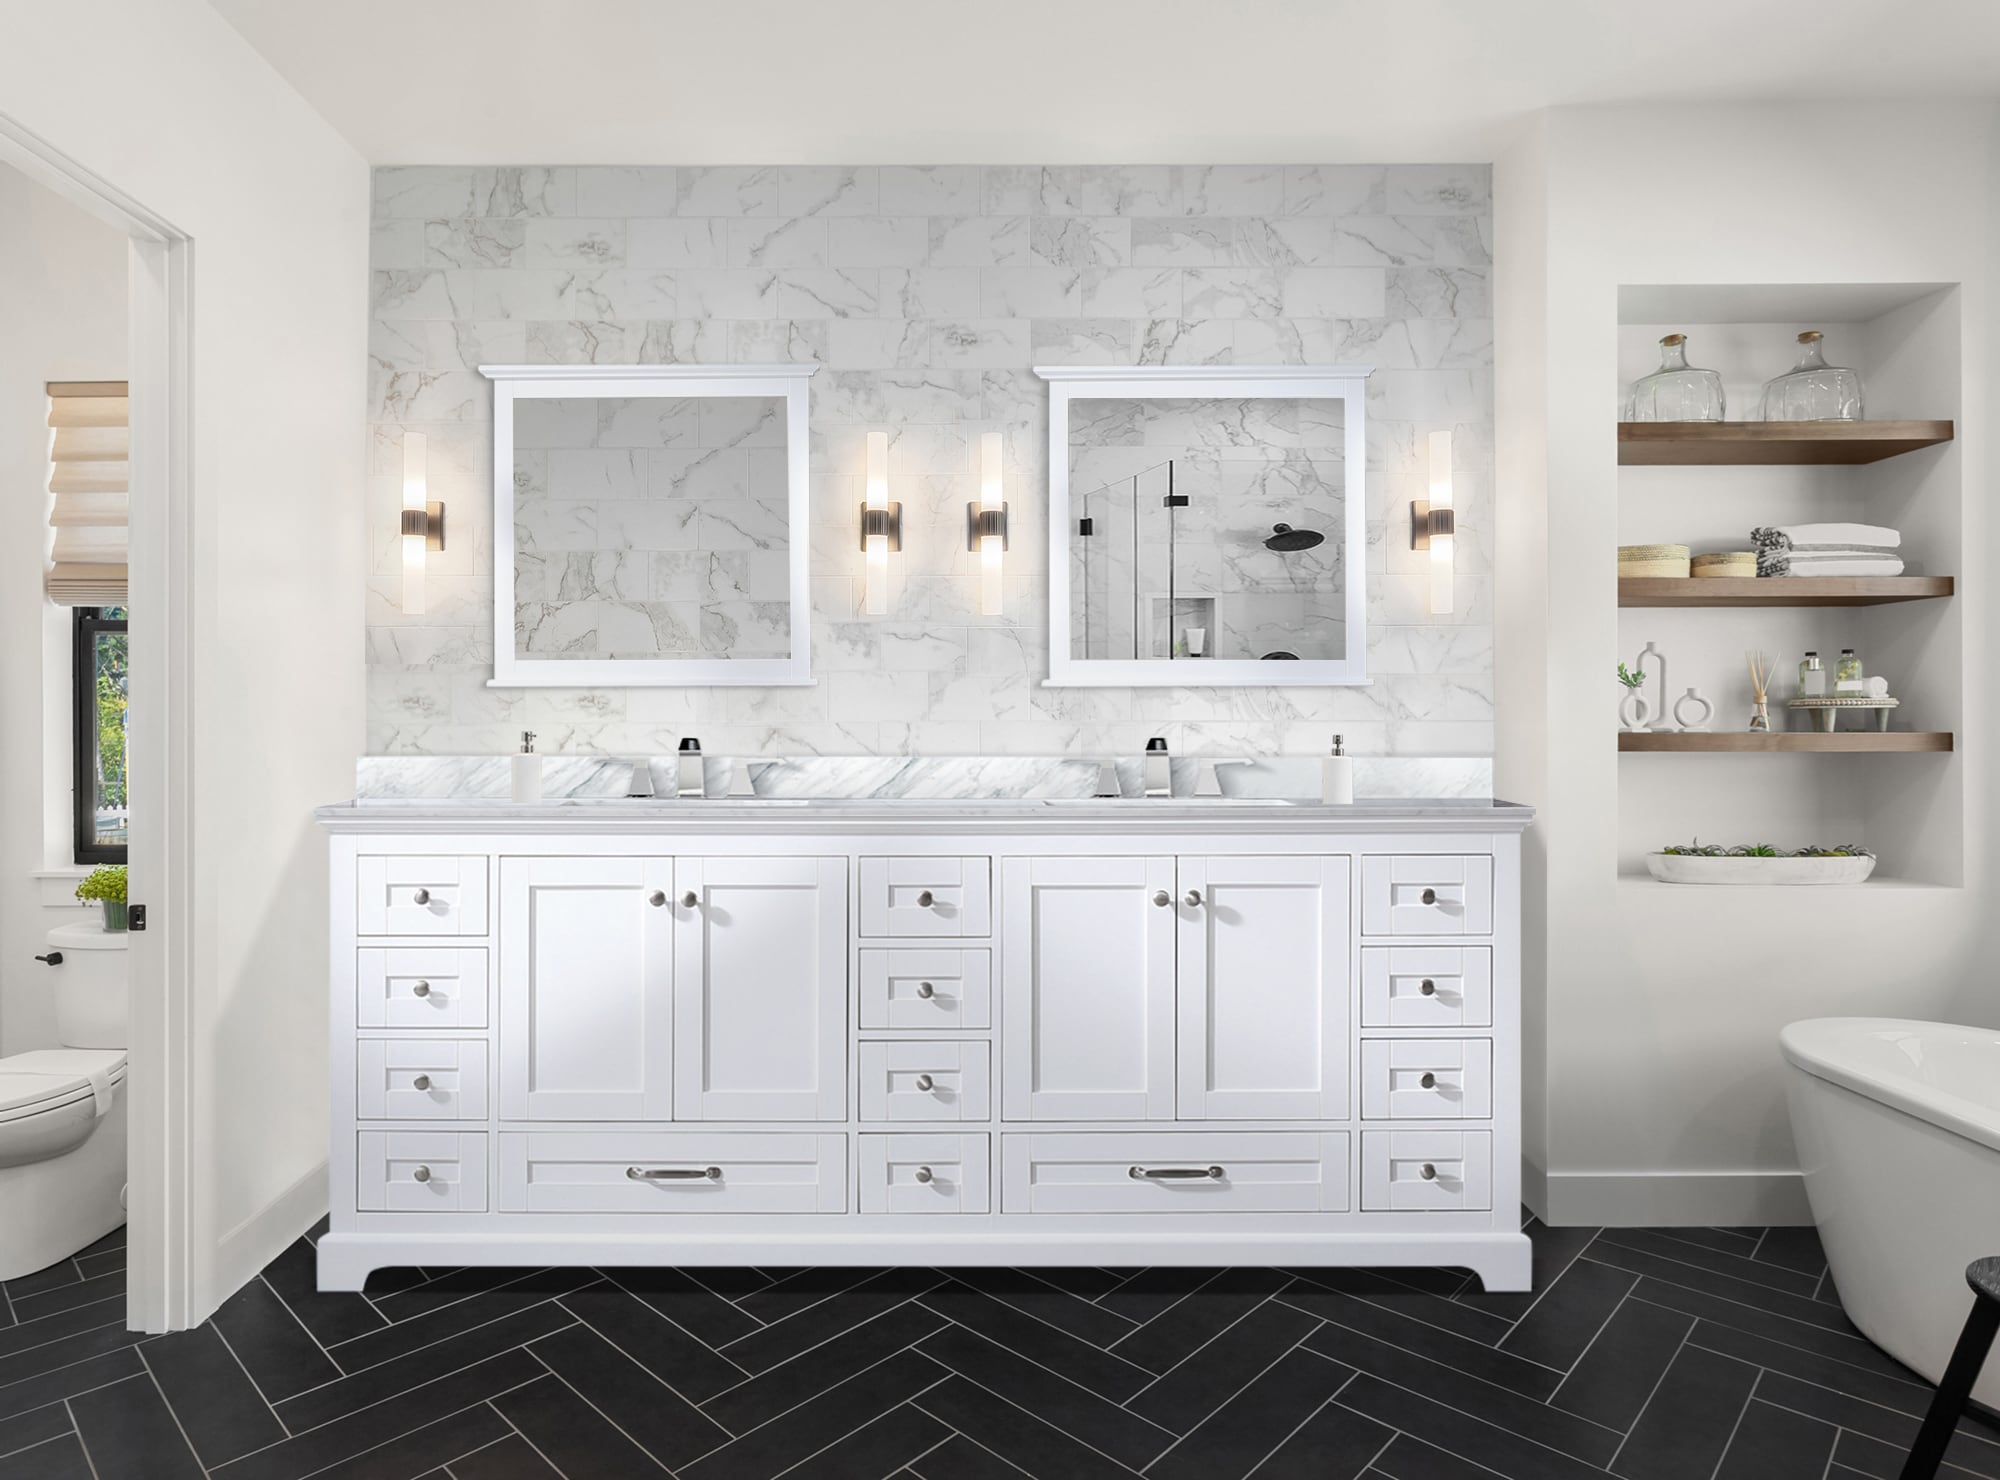 Lexora Ziva 84 in W x 22 in D Rustic Barnwood Double Bath Vanity, Cultured  Marble Top and 34 in Mirrors LZV352284SNJSM34 - The Home Depot